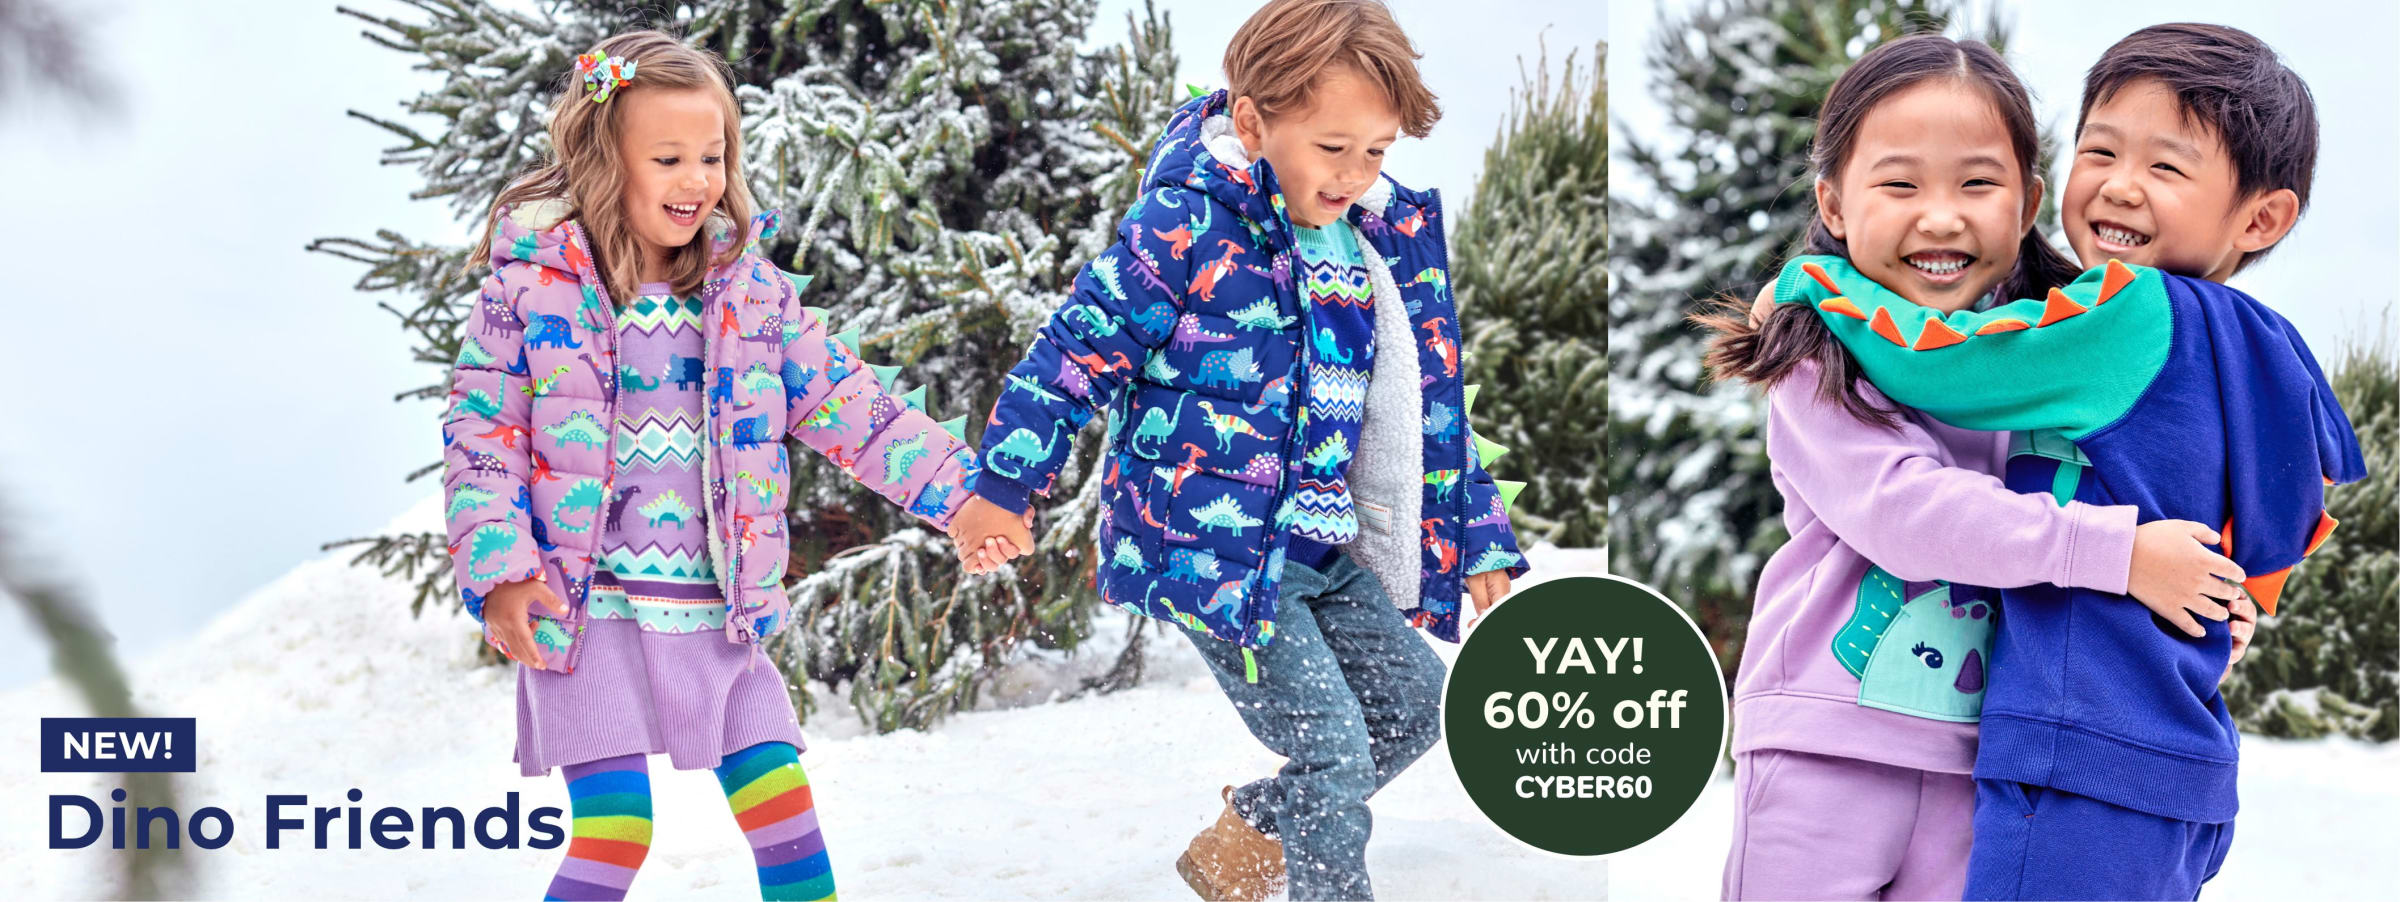 Dino Friends YAY! 60% off with code CYBER60